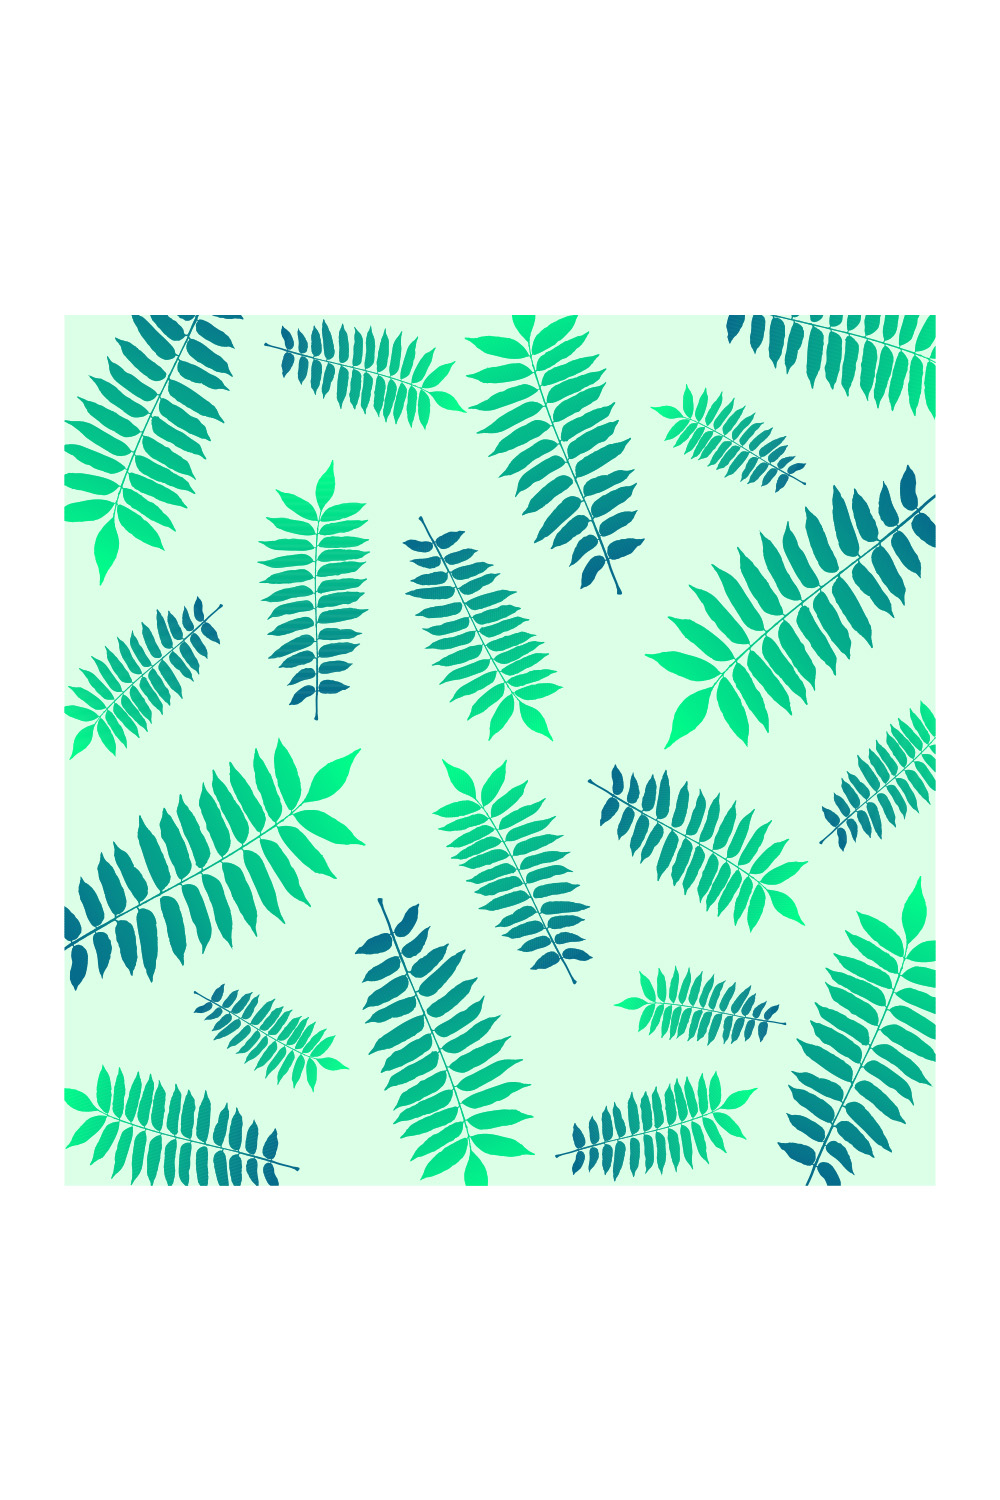 Sunti leaf background pinterest preview image.